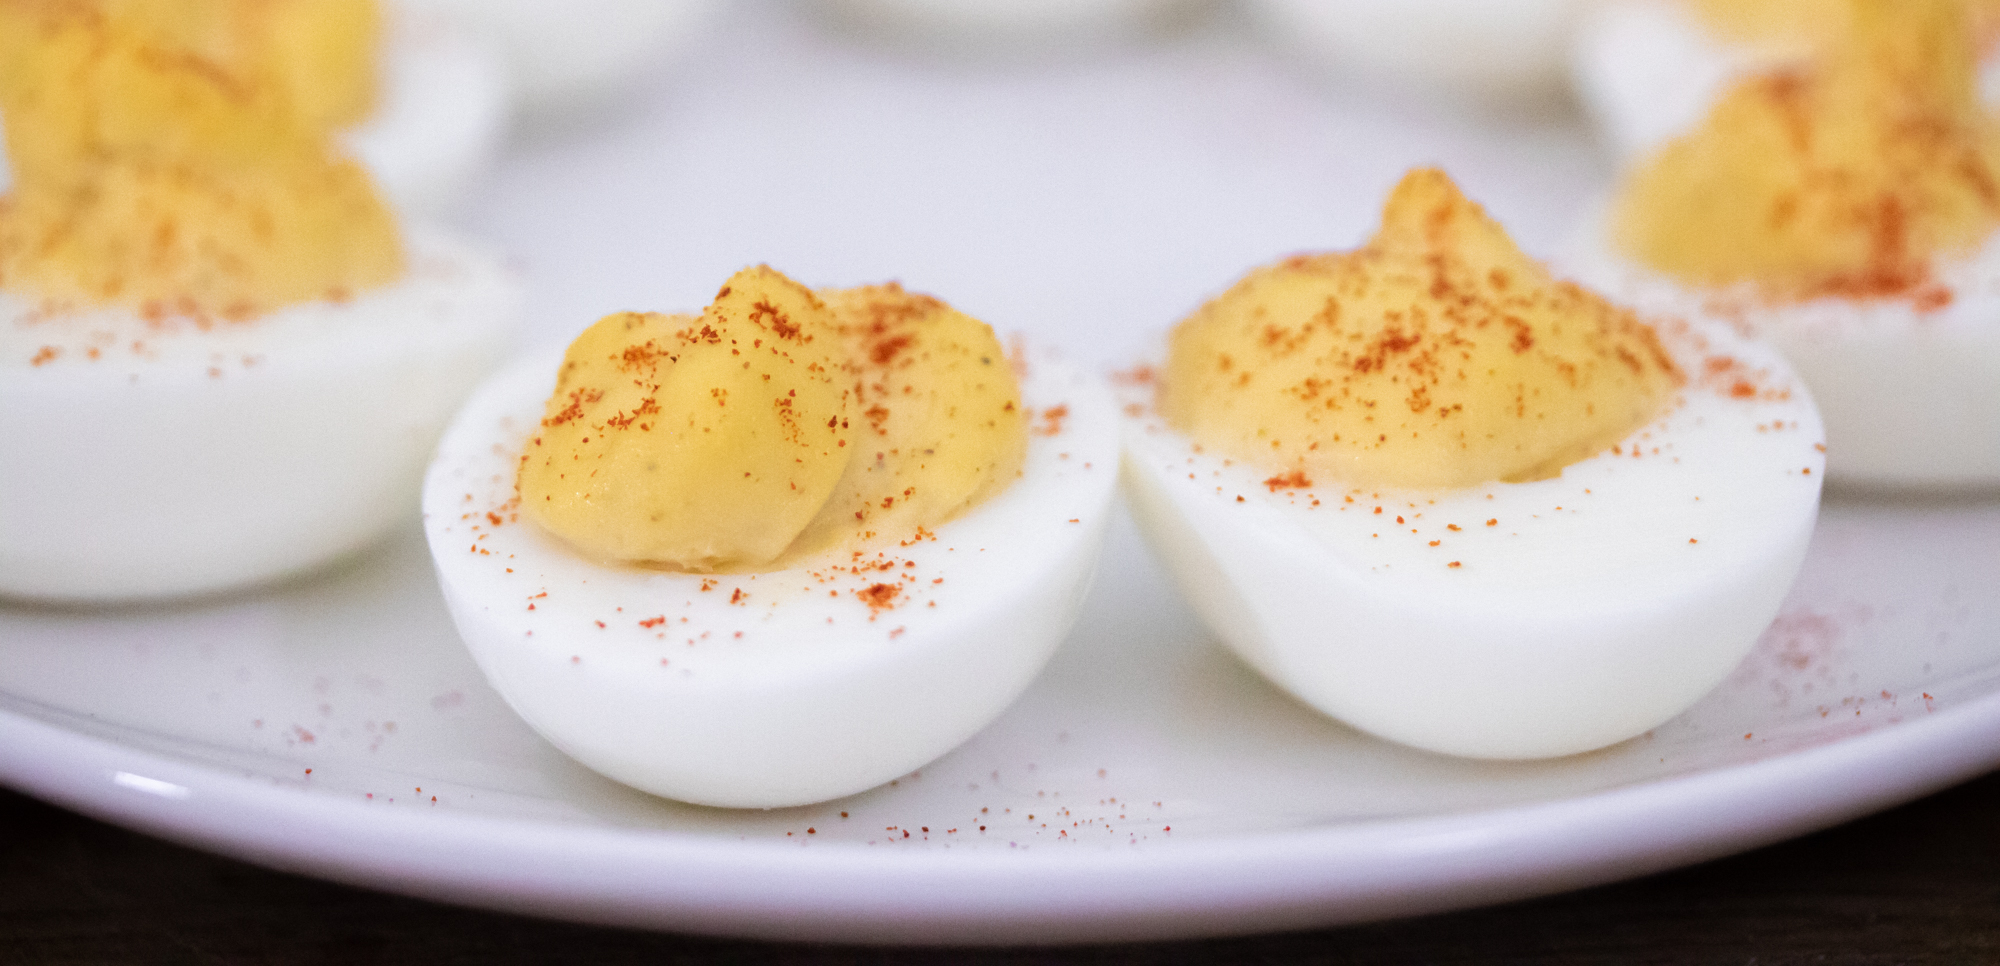 Easy Deviled Eggs My Deviled Eggs Are Too Salty